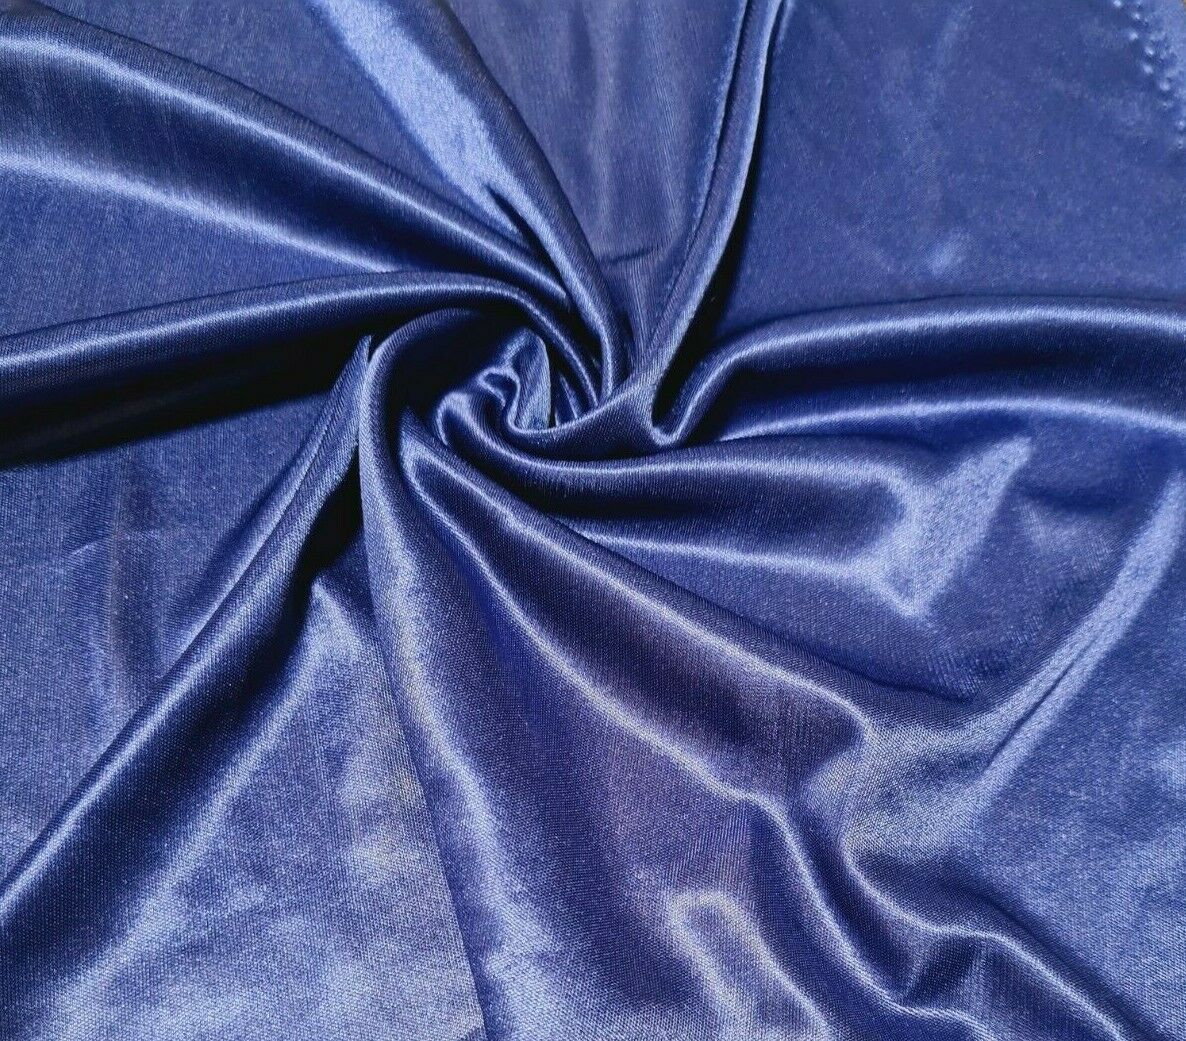 JERSEY LINING FABRIC NAVY AND PURPLE THIN STRETCH -SOLD BY THE METRE